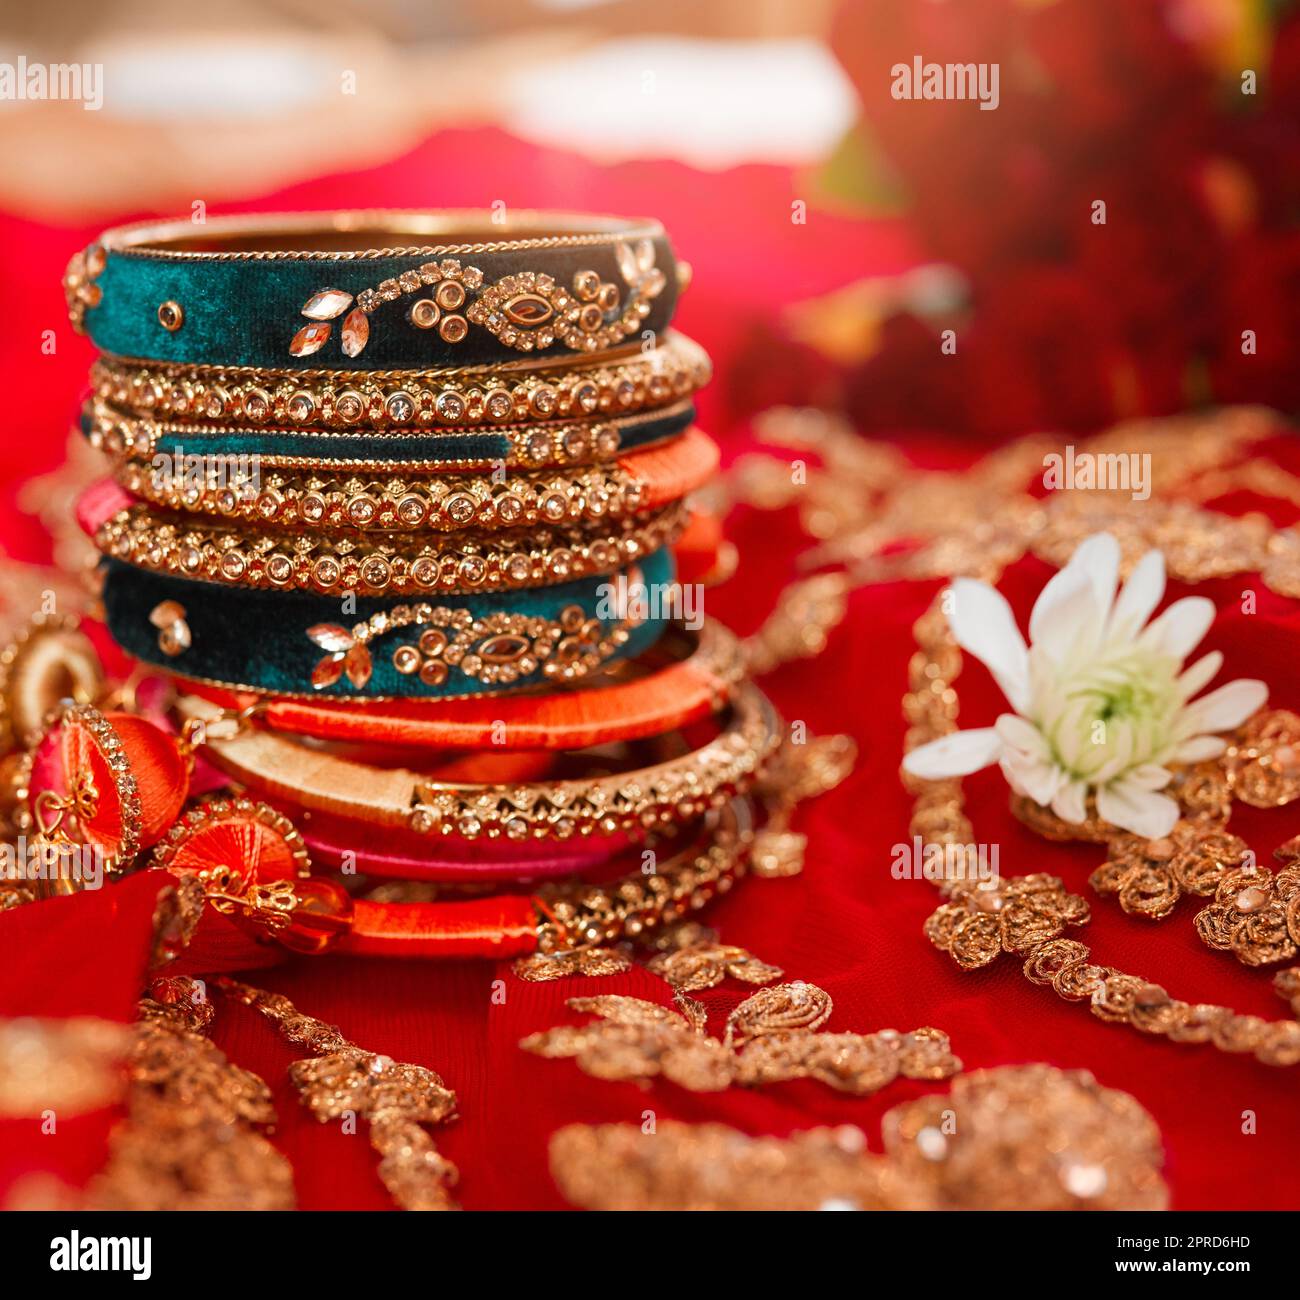 Exquisite bangles for an exquisite look. beautiful bangles for a bride to wear at a traditional wedding. Stock Photo